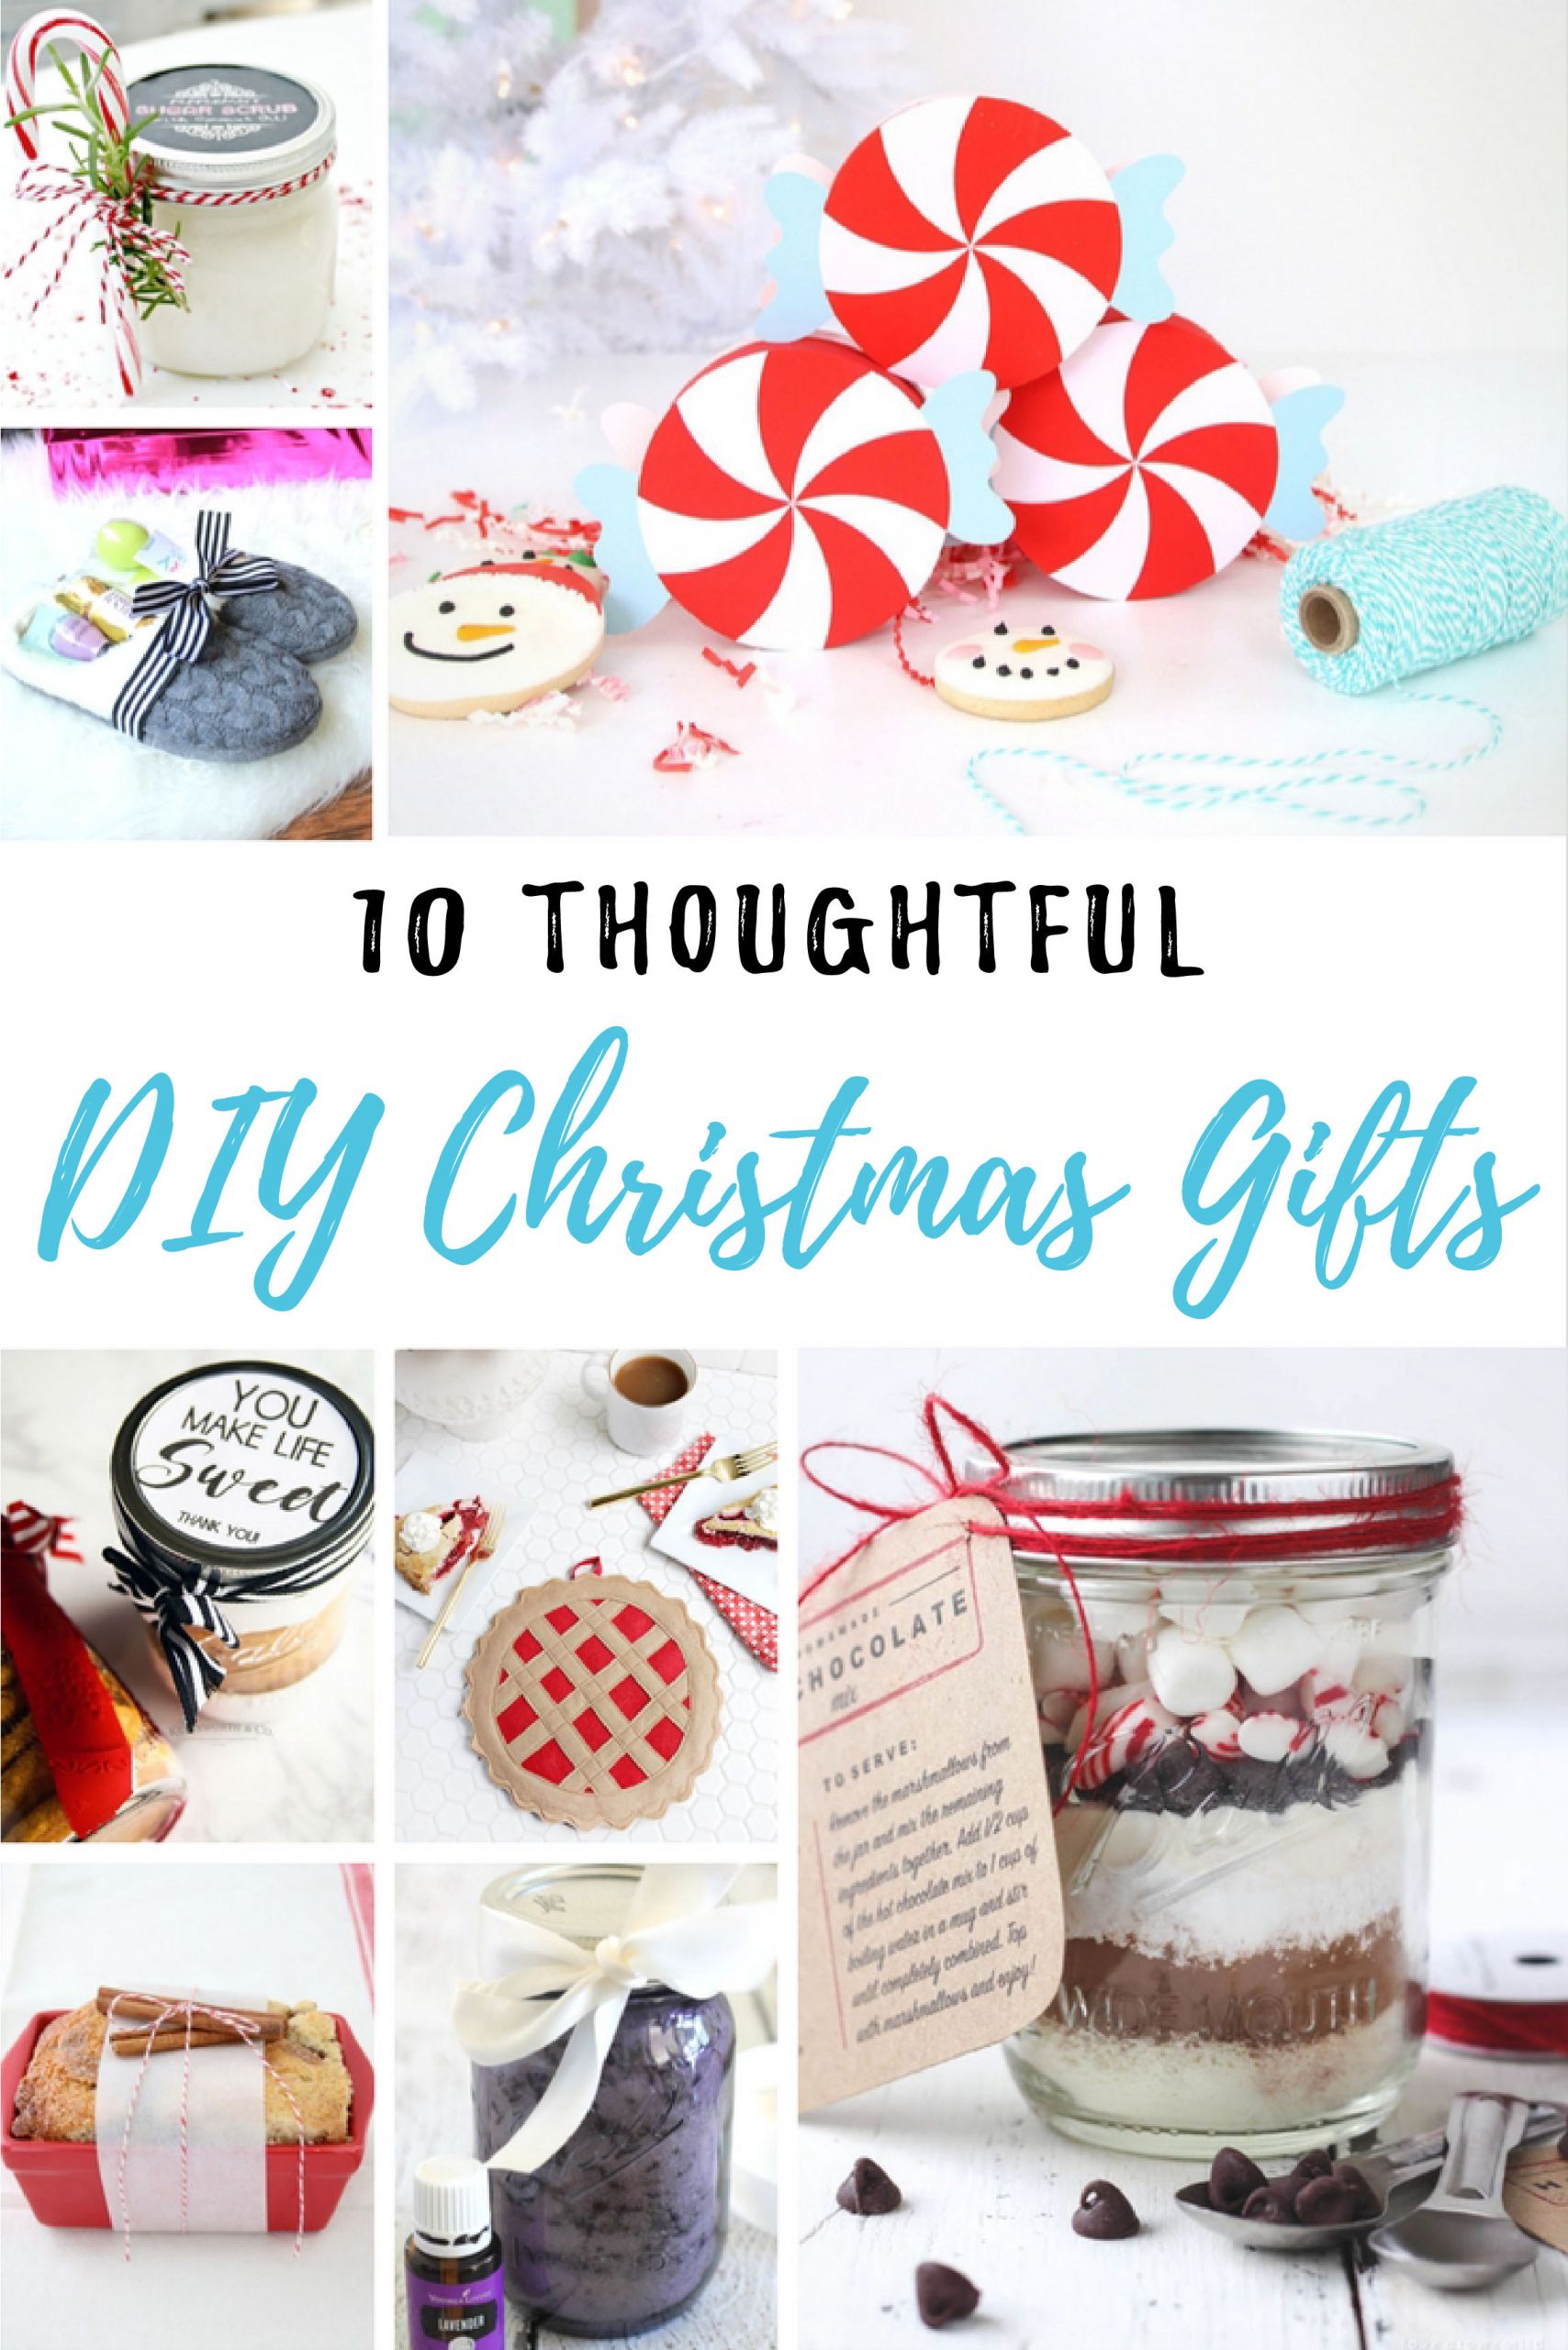 Thoughtful DIY Gifts
 10 Thoughtful DIY Christmas Gifts